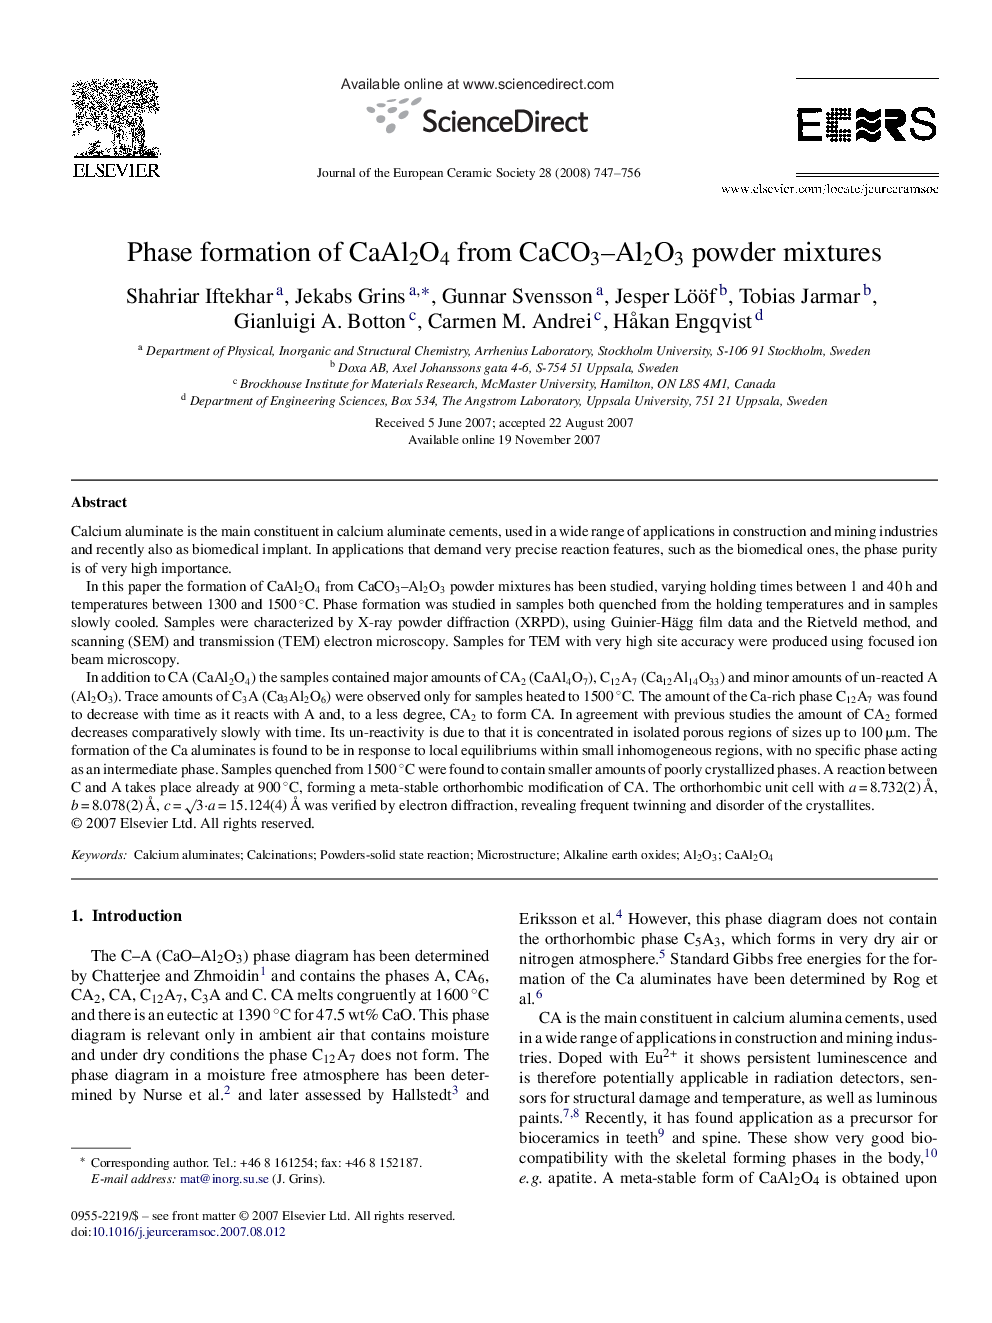 Phase formation of CaAl2O4 from CaCO3–Al2O3 powder mixtures